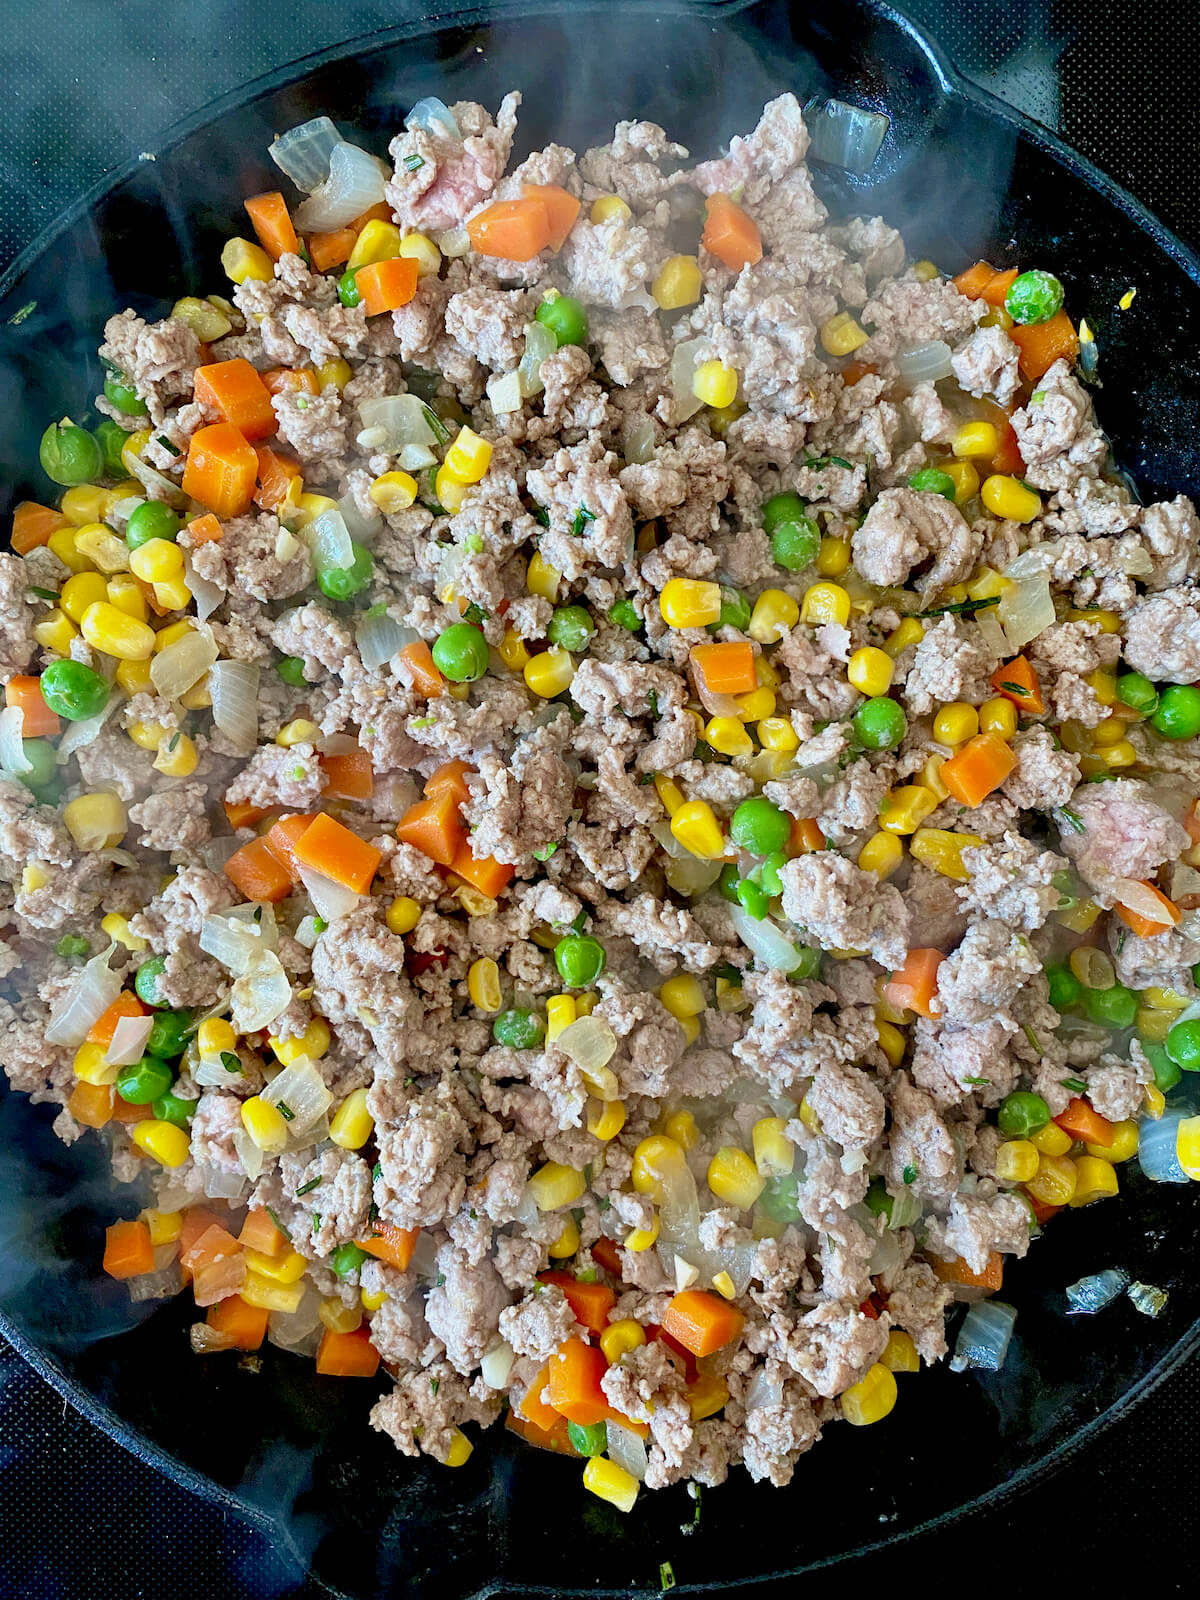 Ground turkey and vegetables being cooked together in a cast iron skillet.